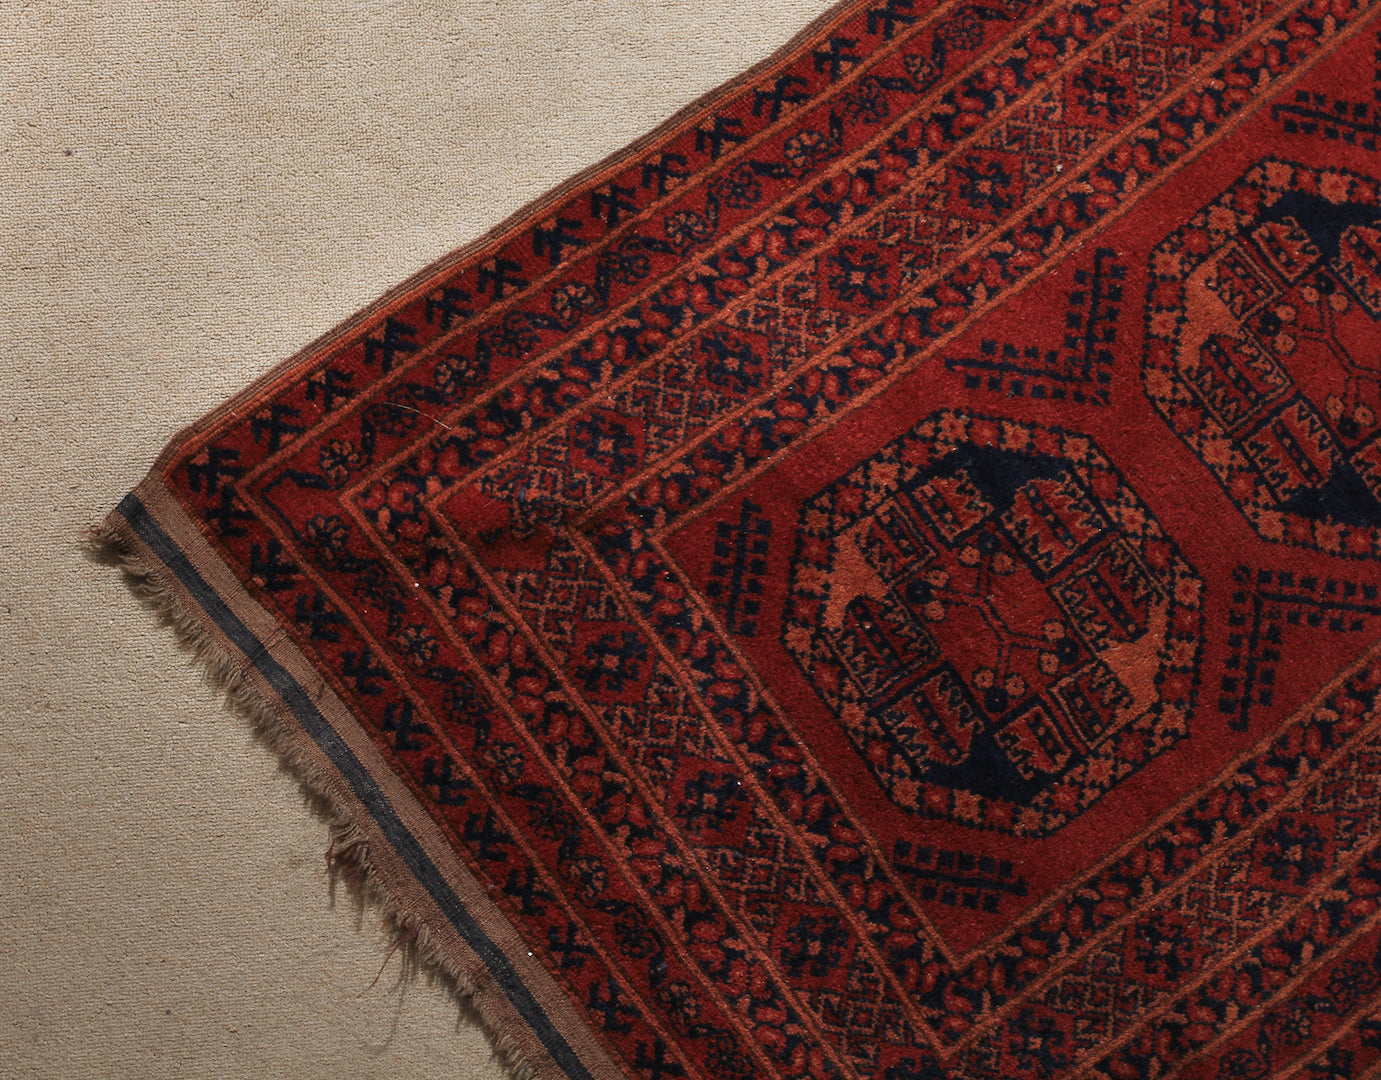 A 2.5 feet by 10 feet turkoman wool rug. The colours used are deep red,rust and black.